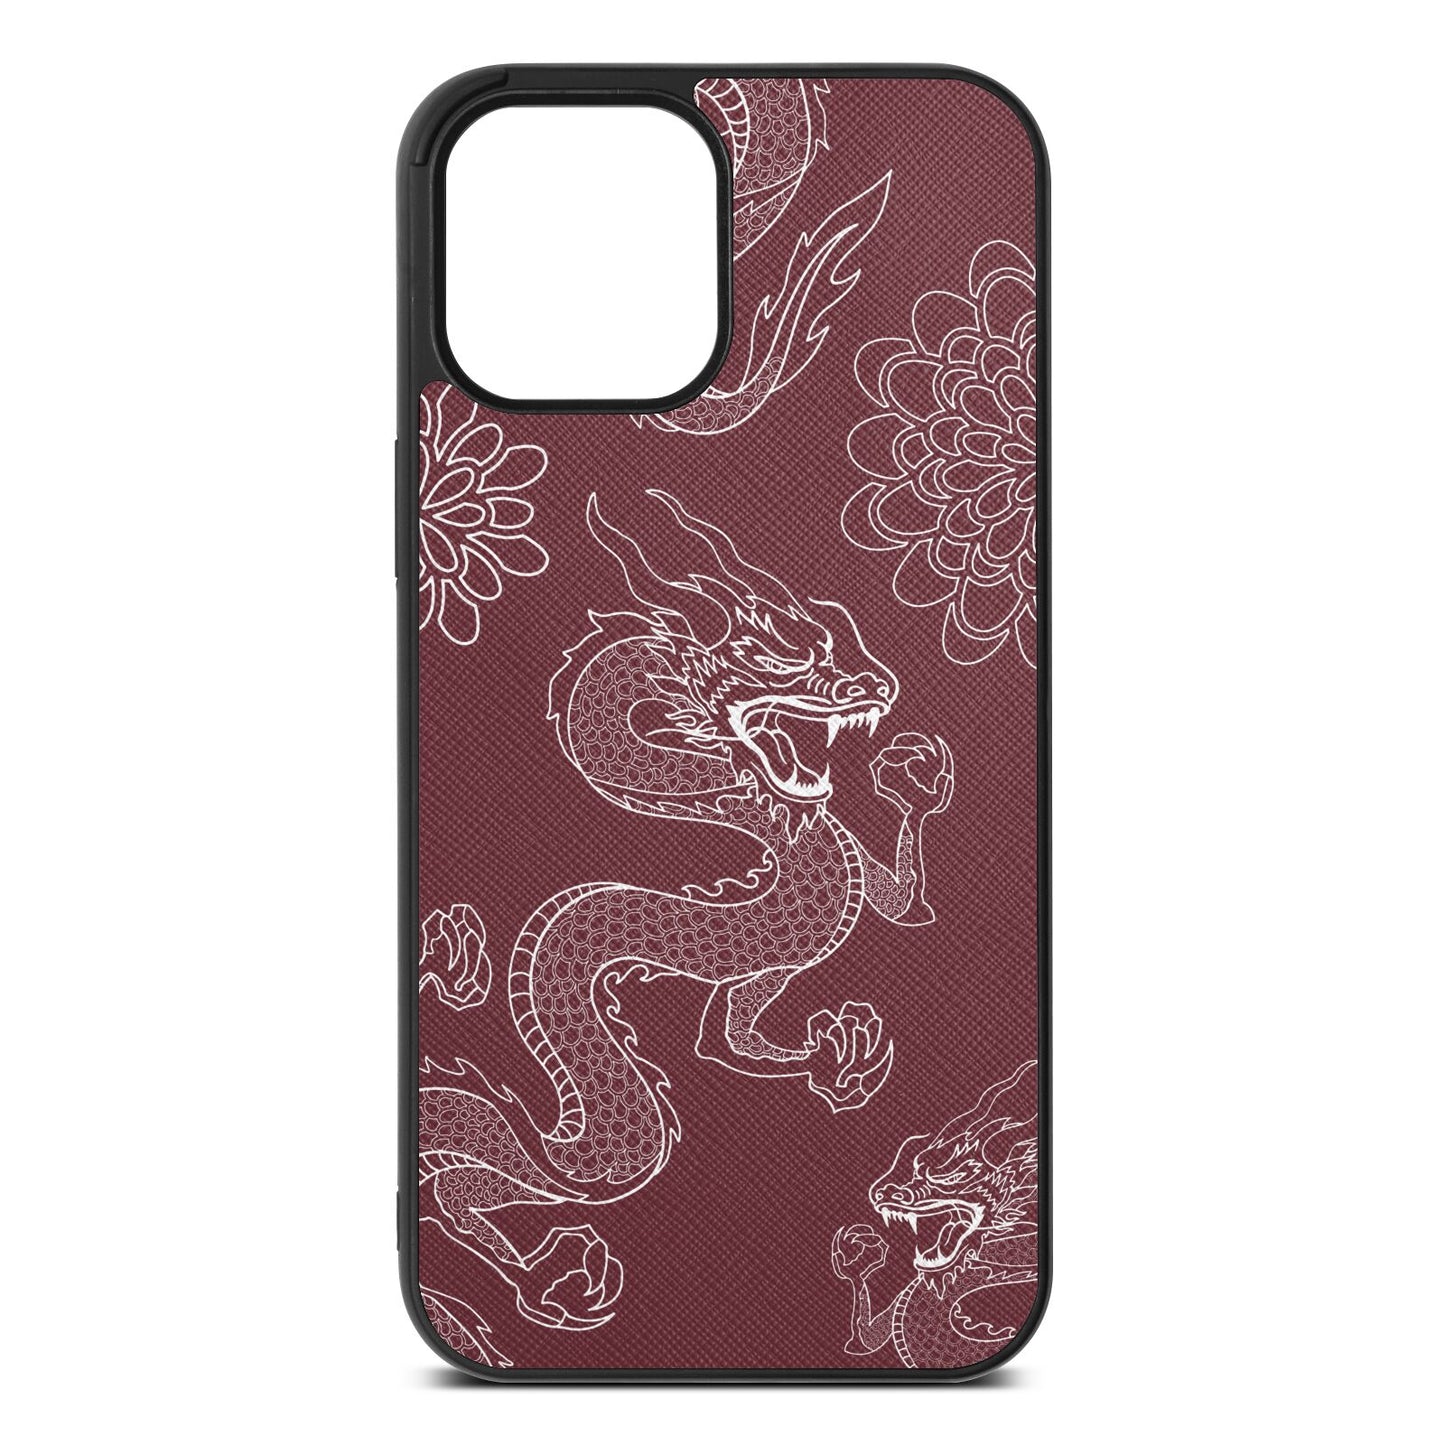 Dragons Rose Brown Saffiano Leather iPhone 12 Pro Max Case